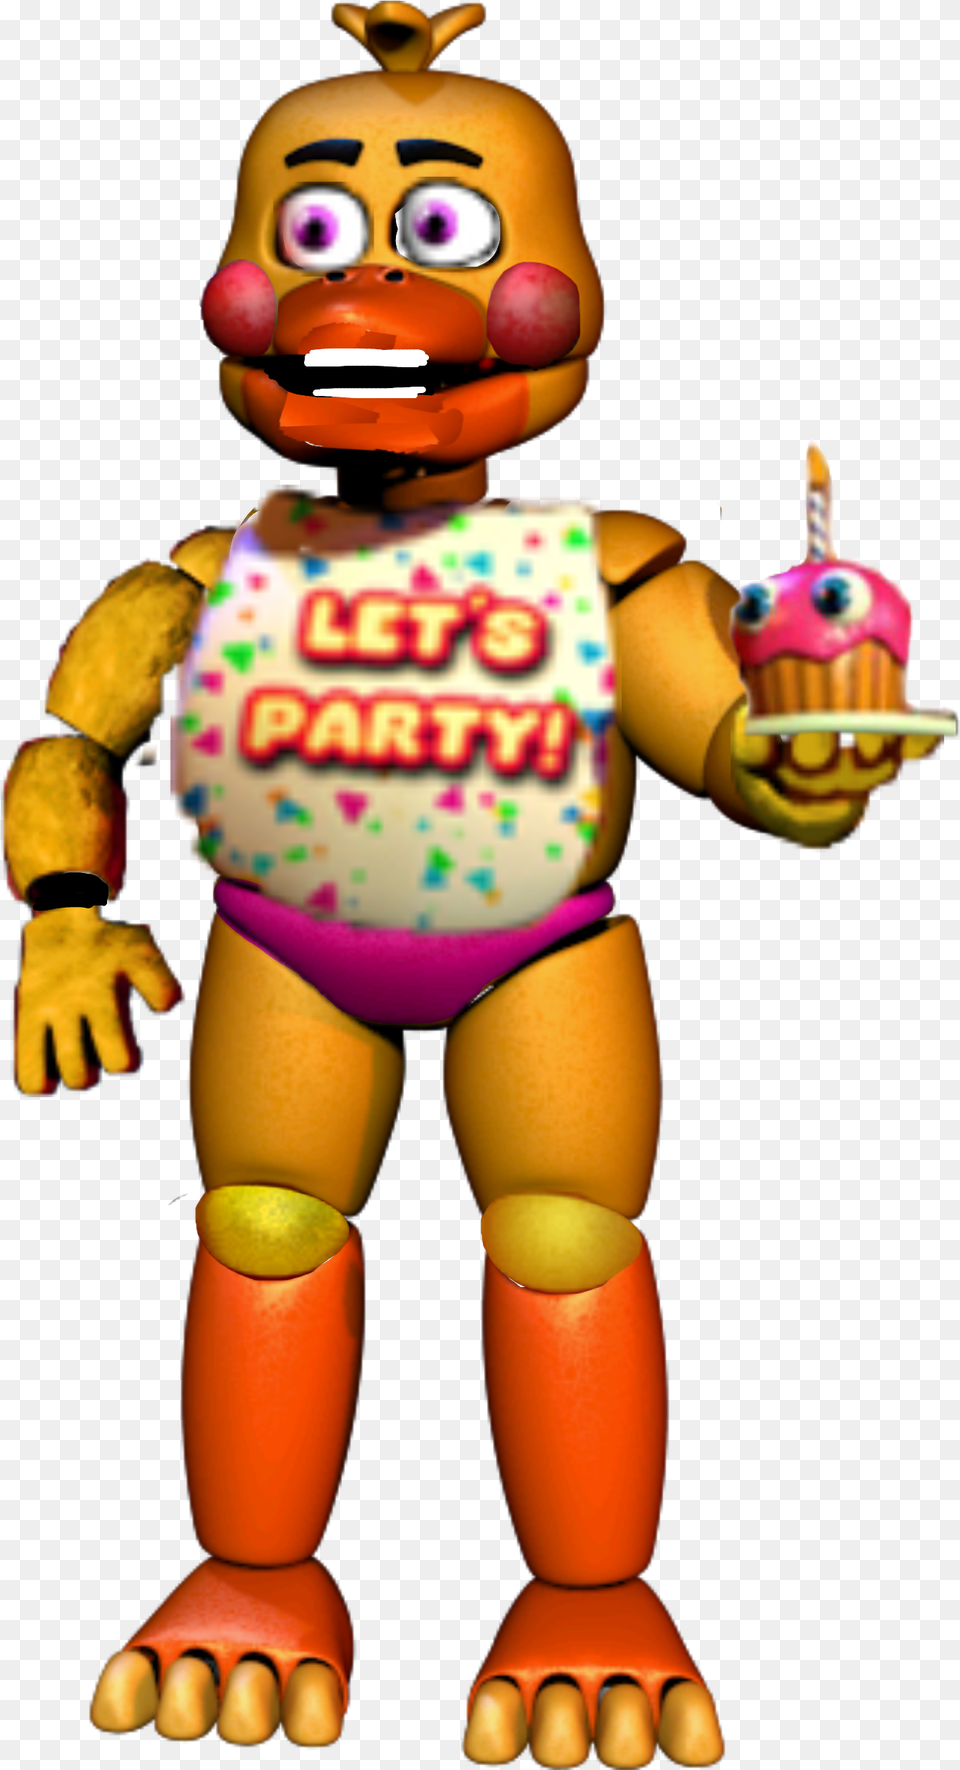 Rockstar Toy Chica Fnaf6 Rockstarchica Chica Toychica Five Nights At Freddy39s 6 Rockstar Chica Png